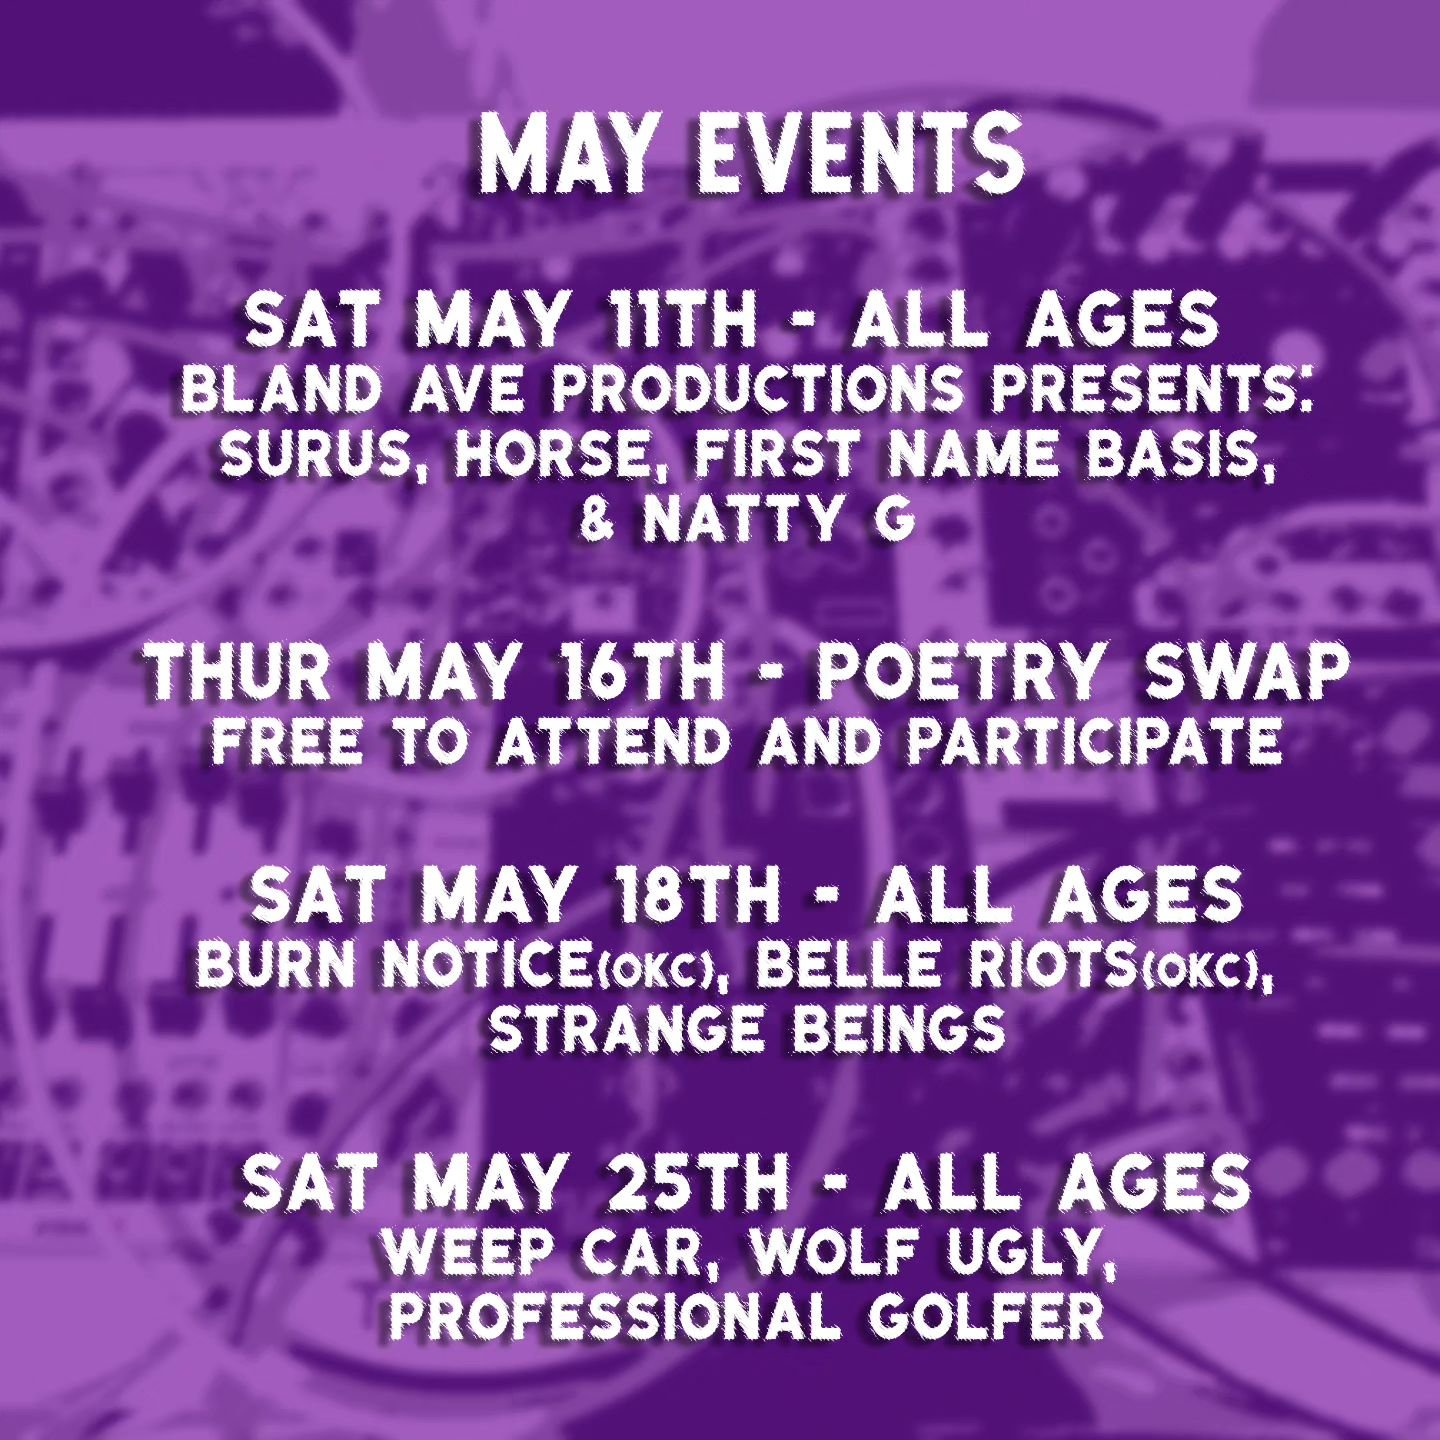 May Events!
All Shows All Ages!

Saturday, May 11th,
Presented by Bland Ave. Productions featuring:
@surusband @horseofficialband @firstnamebasis_band @nattygrayy
Doors at 7 Music at 8
Tickets $10

Thursday, May 16th, 
Poetry Swap hosted by Burnt
Swi